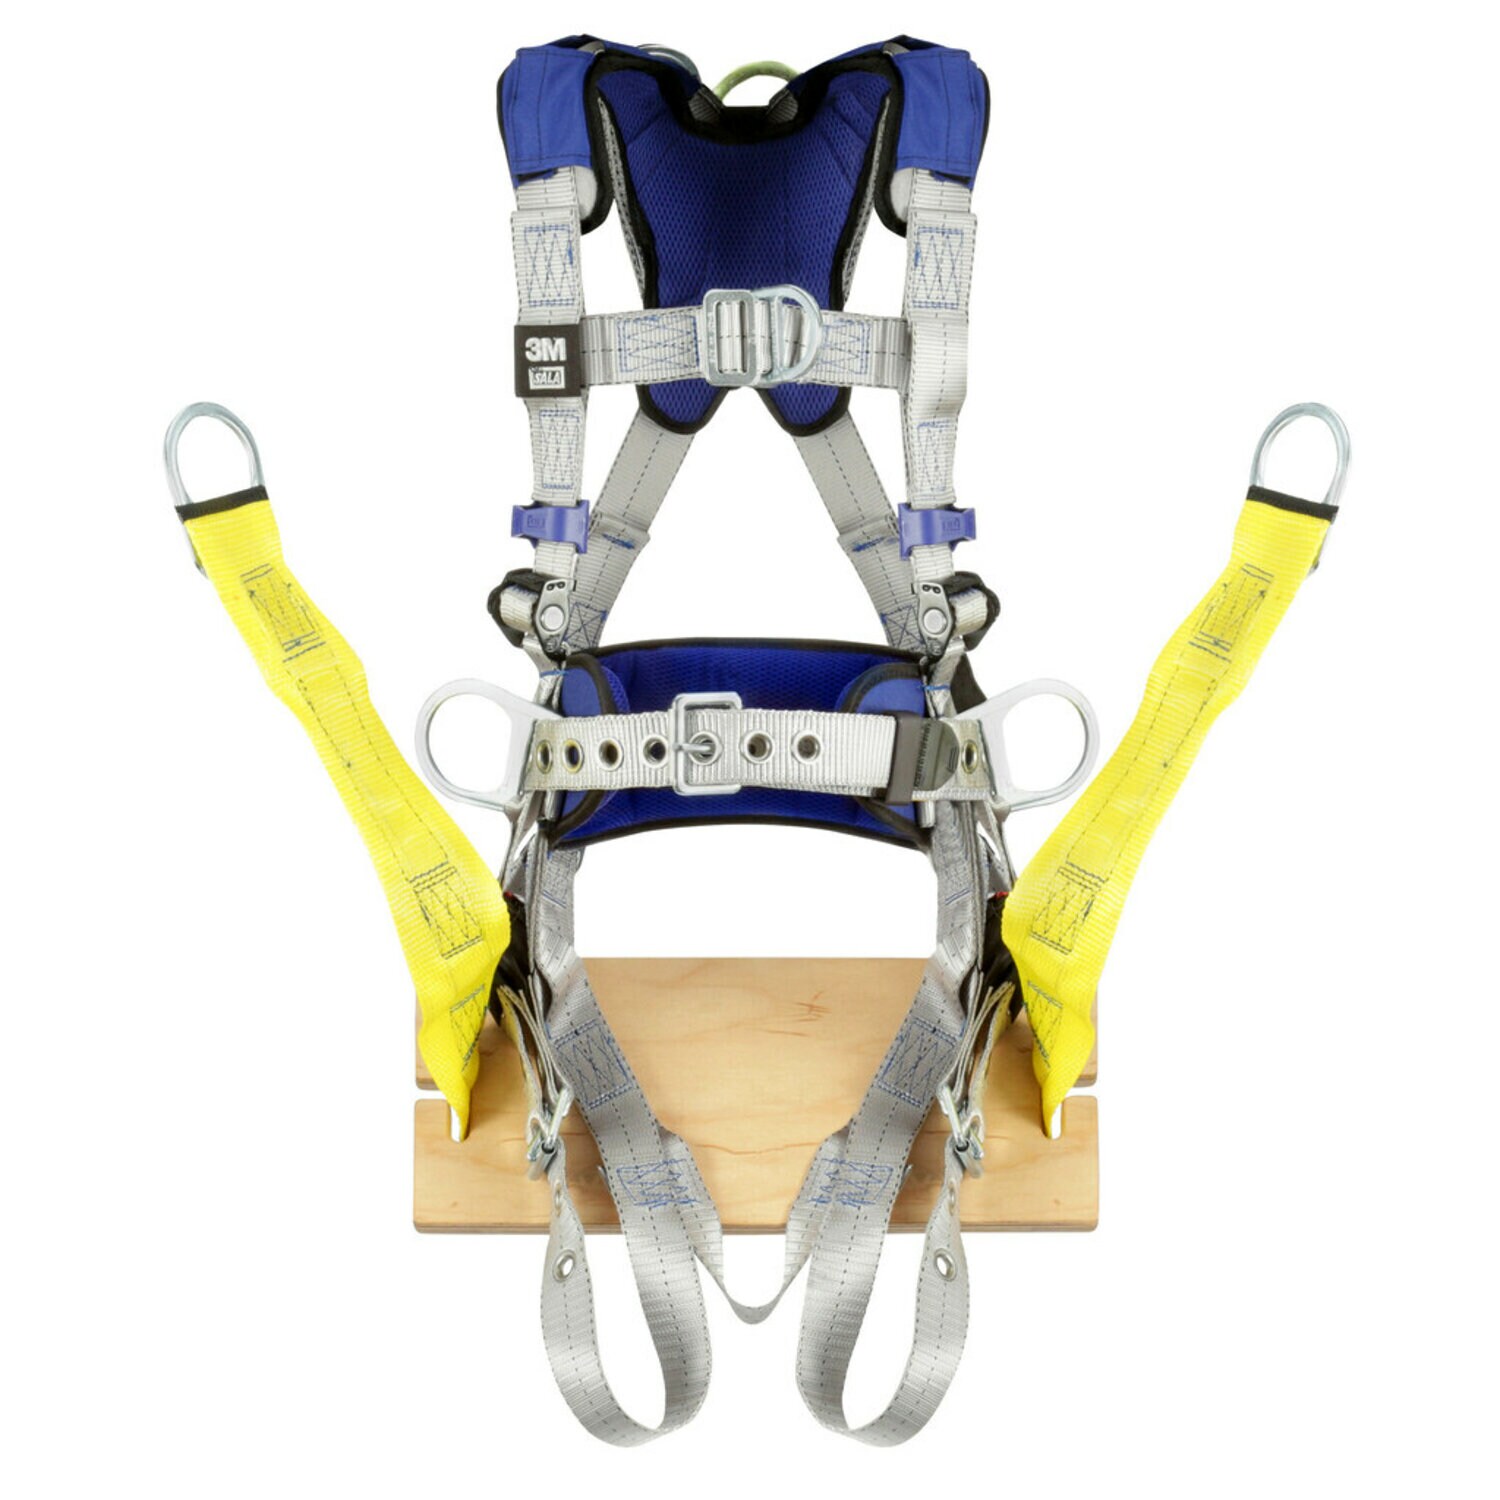 7012817629 - 3M DBI-SALA ExoFit X100 Comfort Construction Oil and Gas Climbing/Positioning/Suspension Safety Harness 1401147, Large